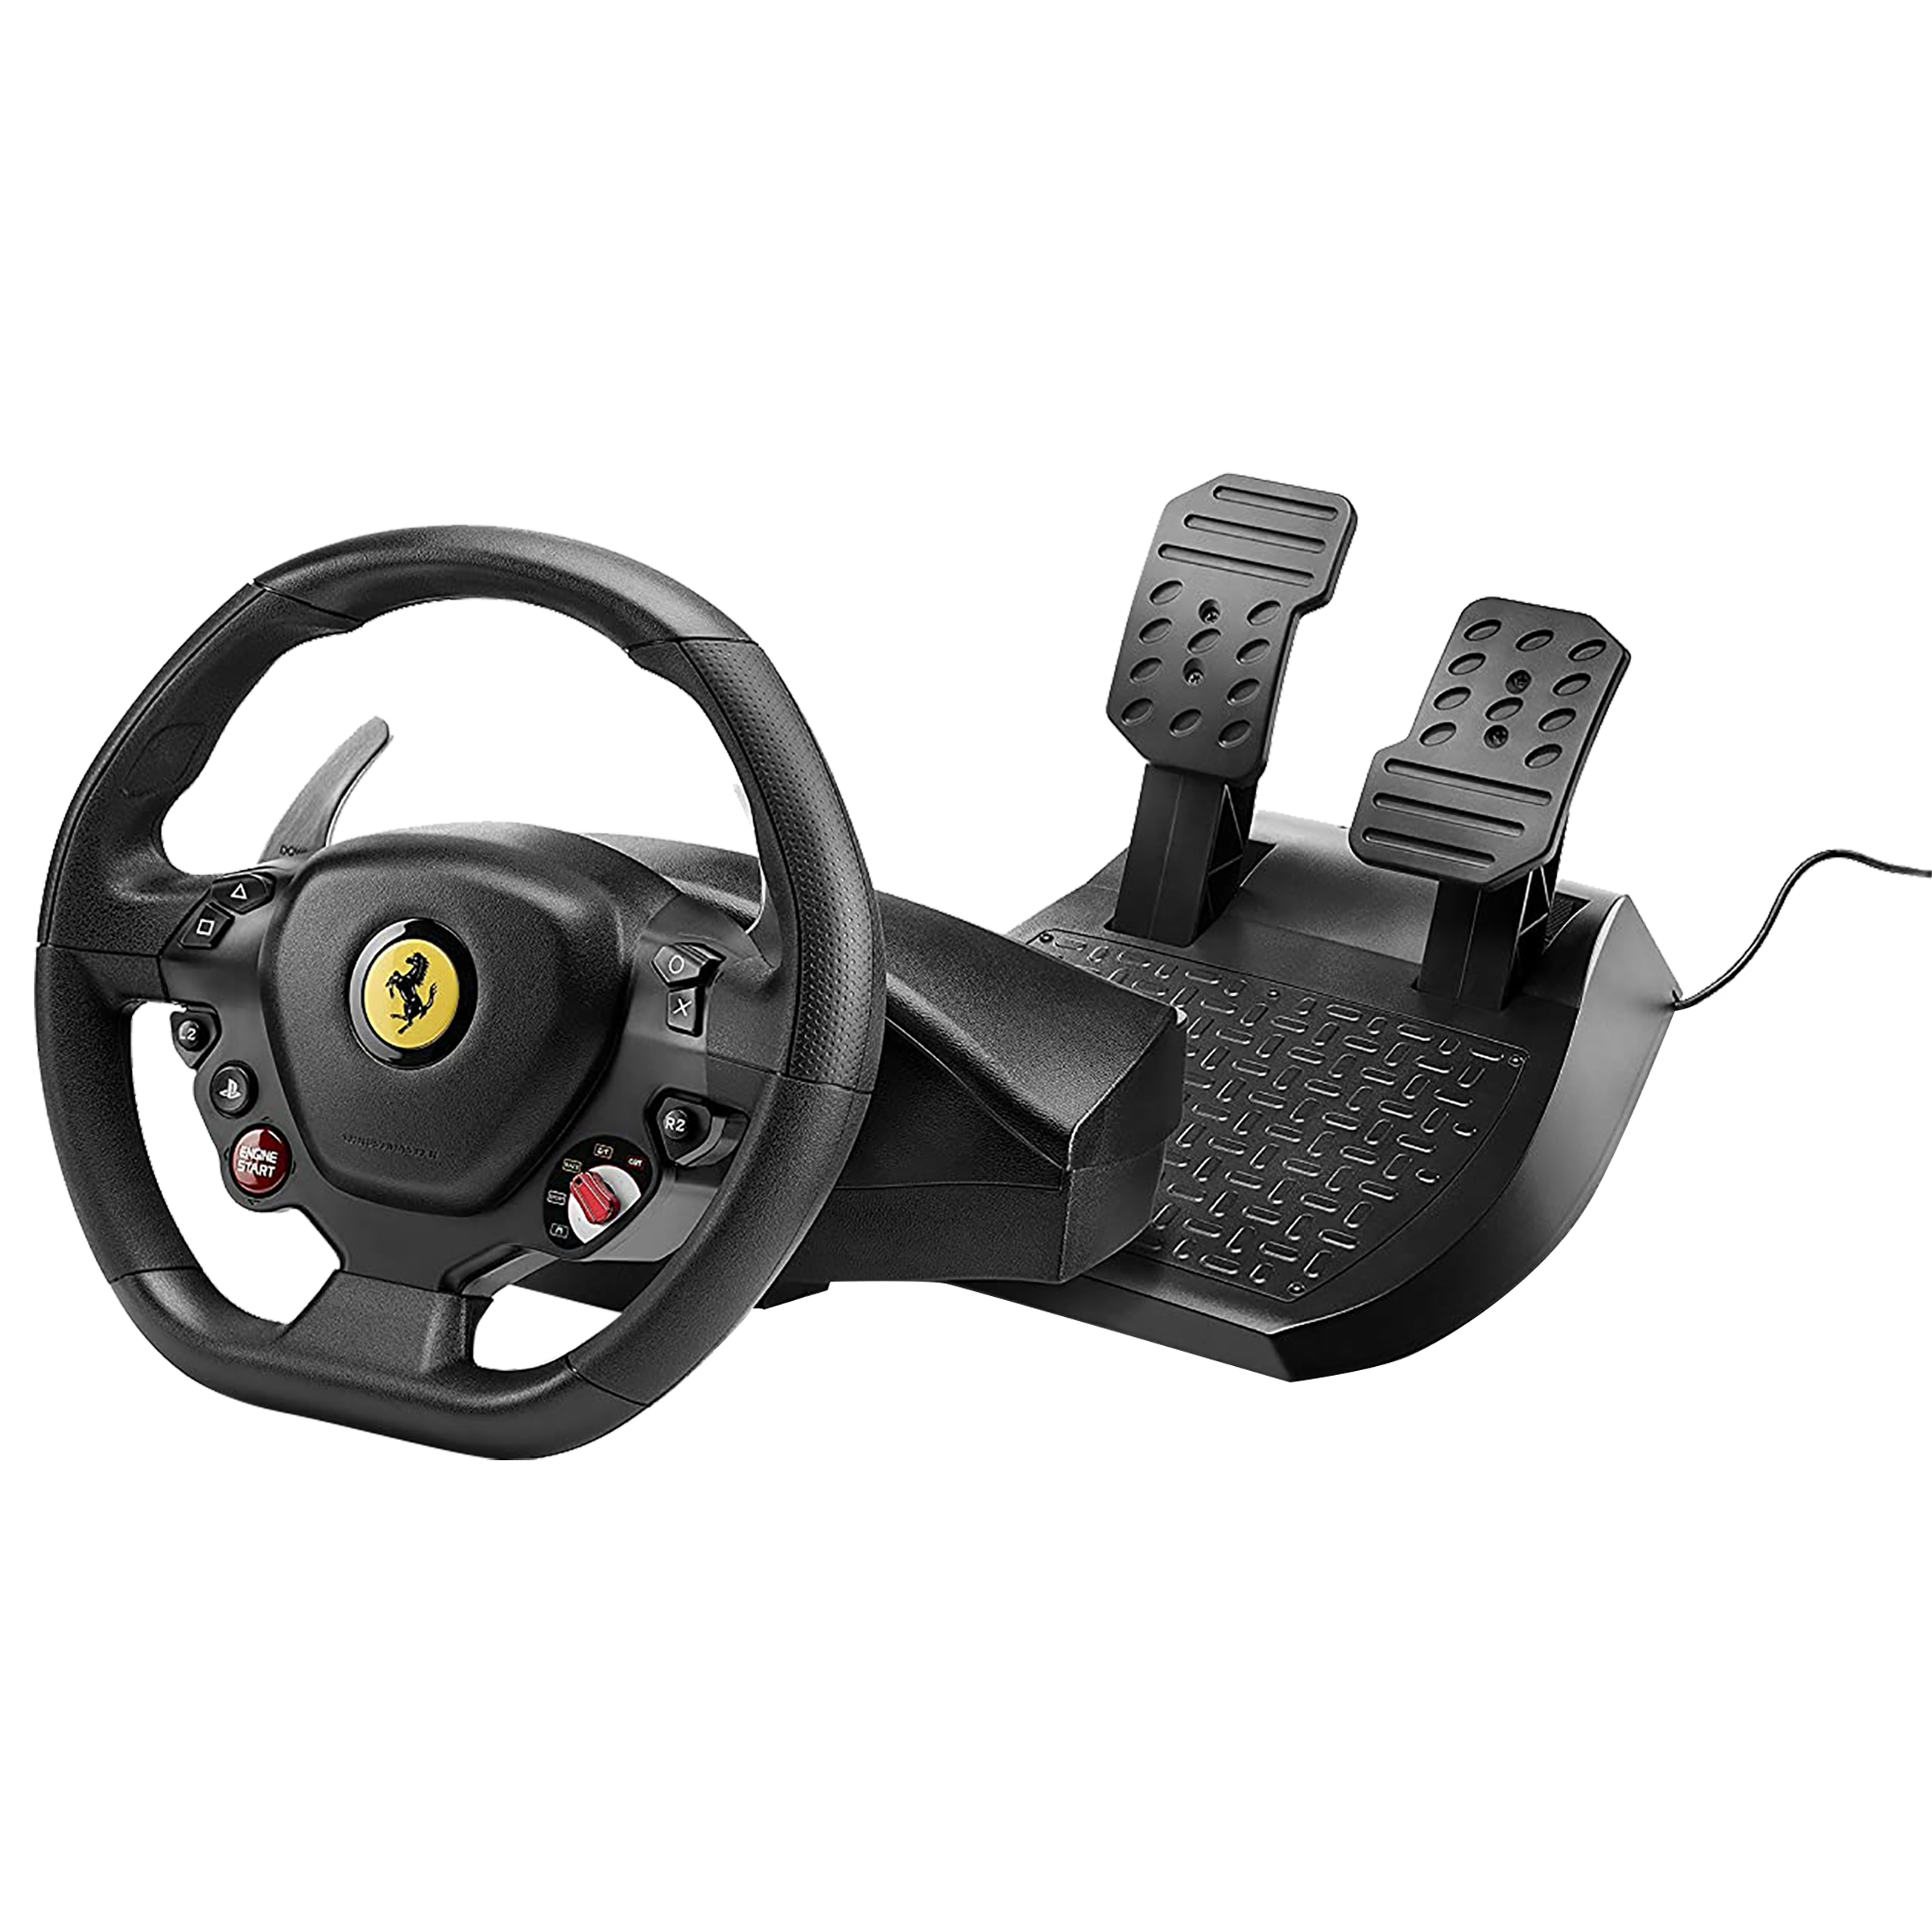 Thrustmaster T80 Ferrari 488 Racing Wheel For PS4 (11 Action Buttons, Black)_1